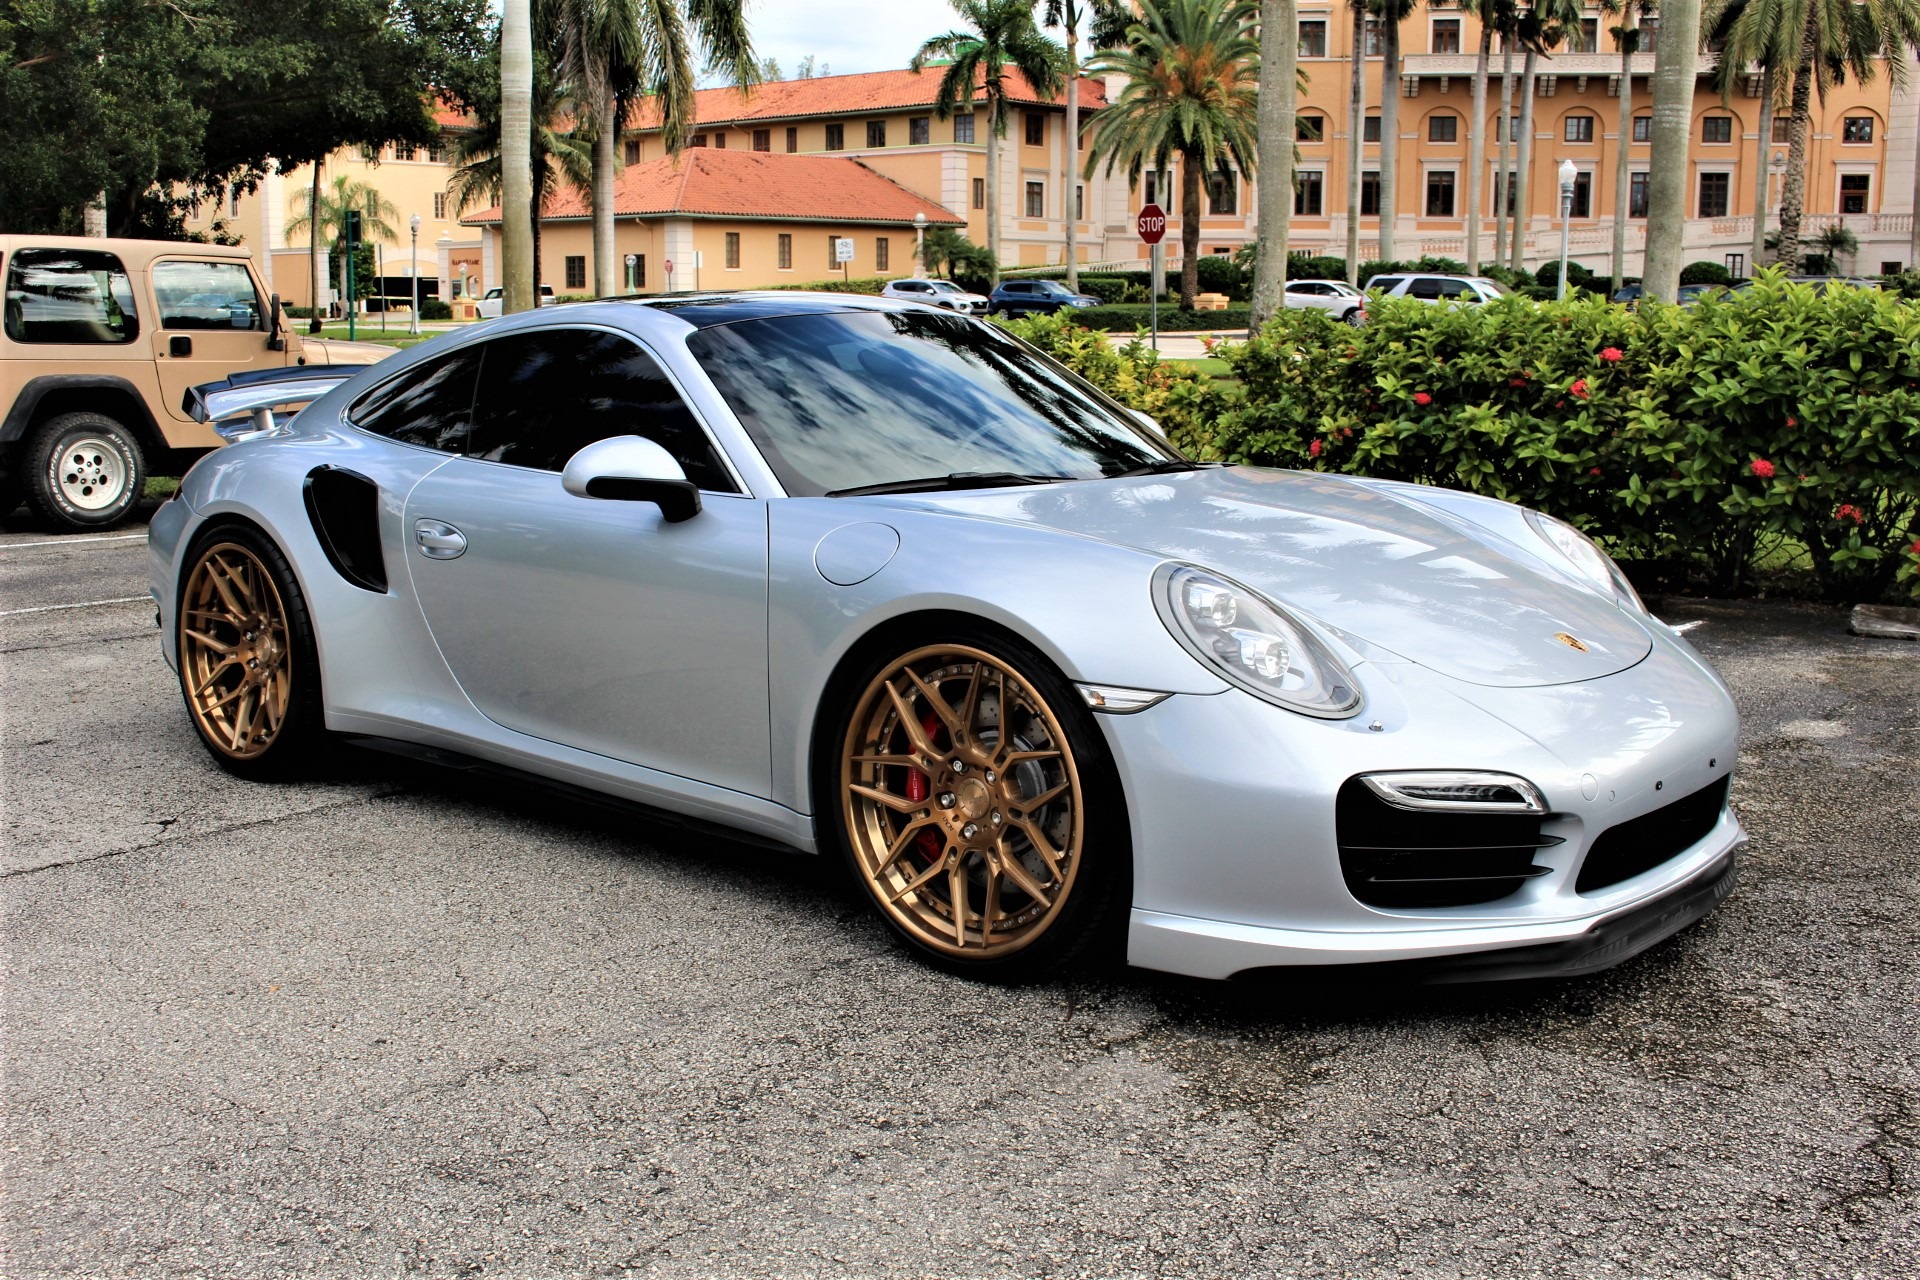 Used 2016 Porsche 911 Turbo for sale Sold at The Gables Sports Cars in Miami FL 33146 3